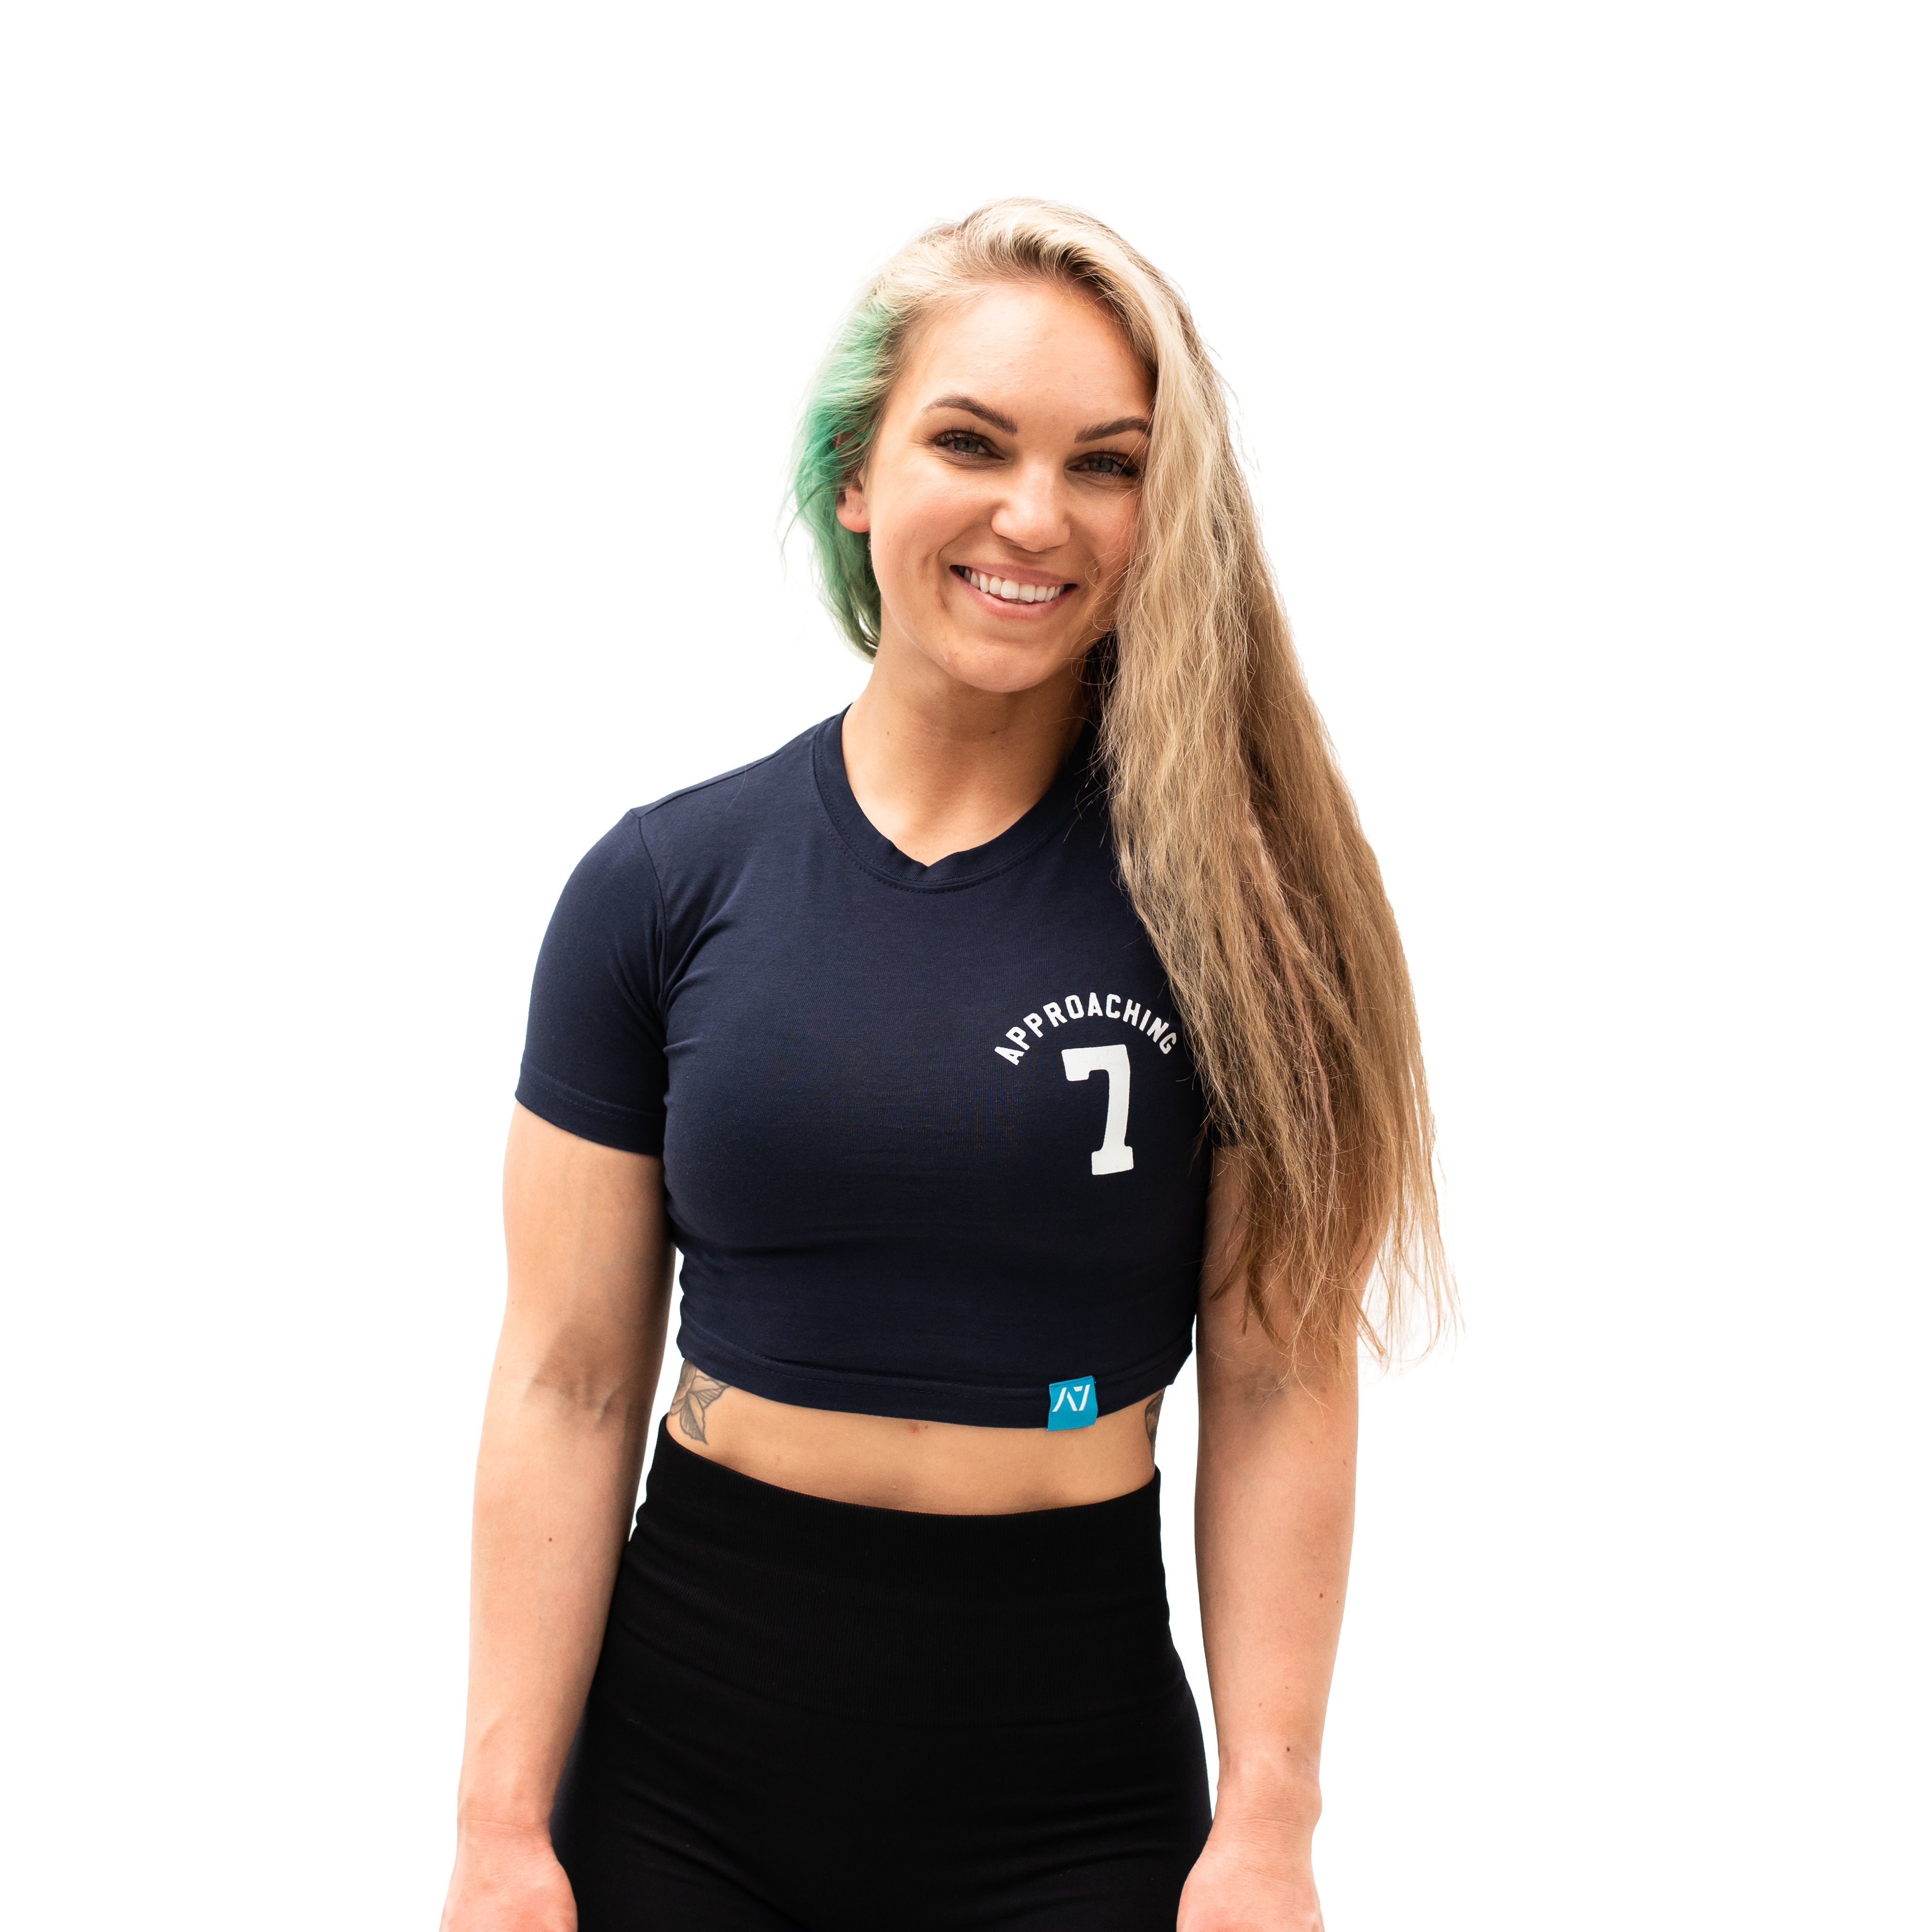 Our Varsity Blue Women’s crop is perfect for in and out of the gym. Purchase Varsity Blue Crop from A7 UK. Best gymwear shipping to UK and Europe from A7 UK. Varisty Blue is our newest Non Bar Grip Design. The best Powerlifting apparel for all your workouts. Available in UK and Europe including France, Italy, Germany, Sweden and Poland.